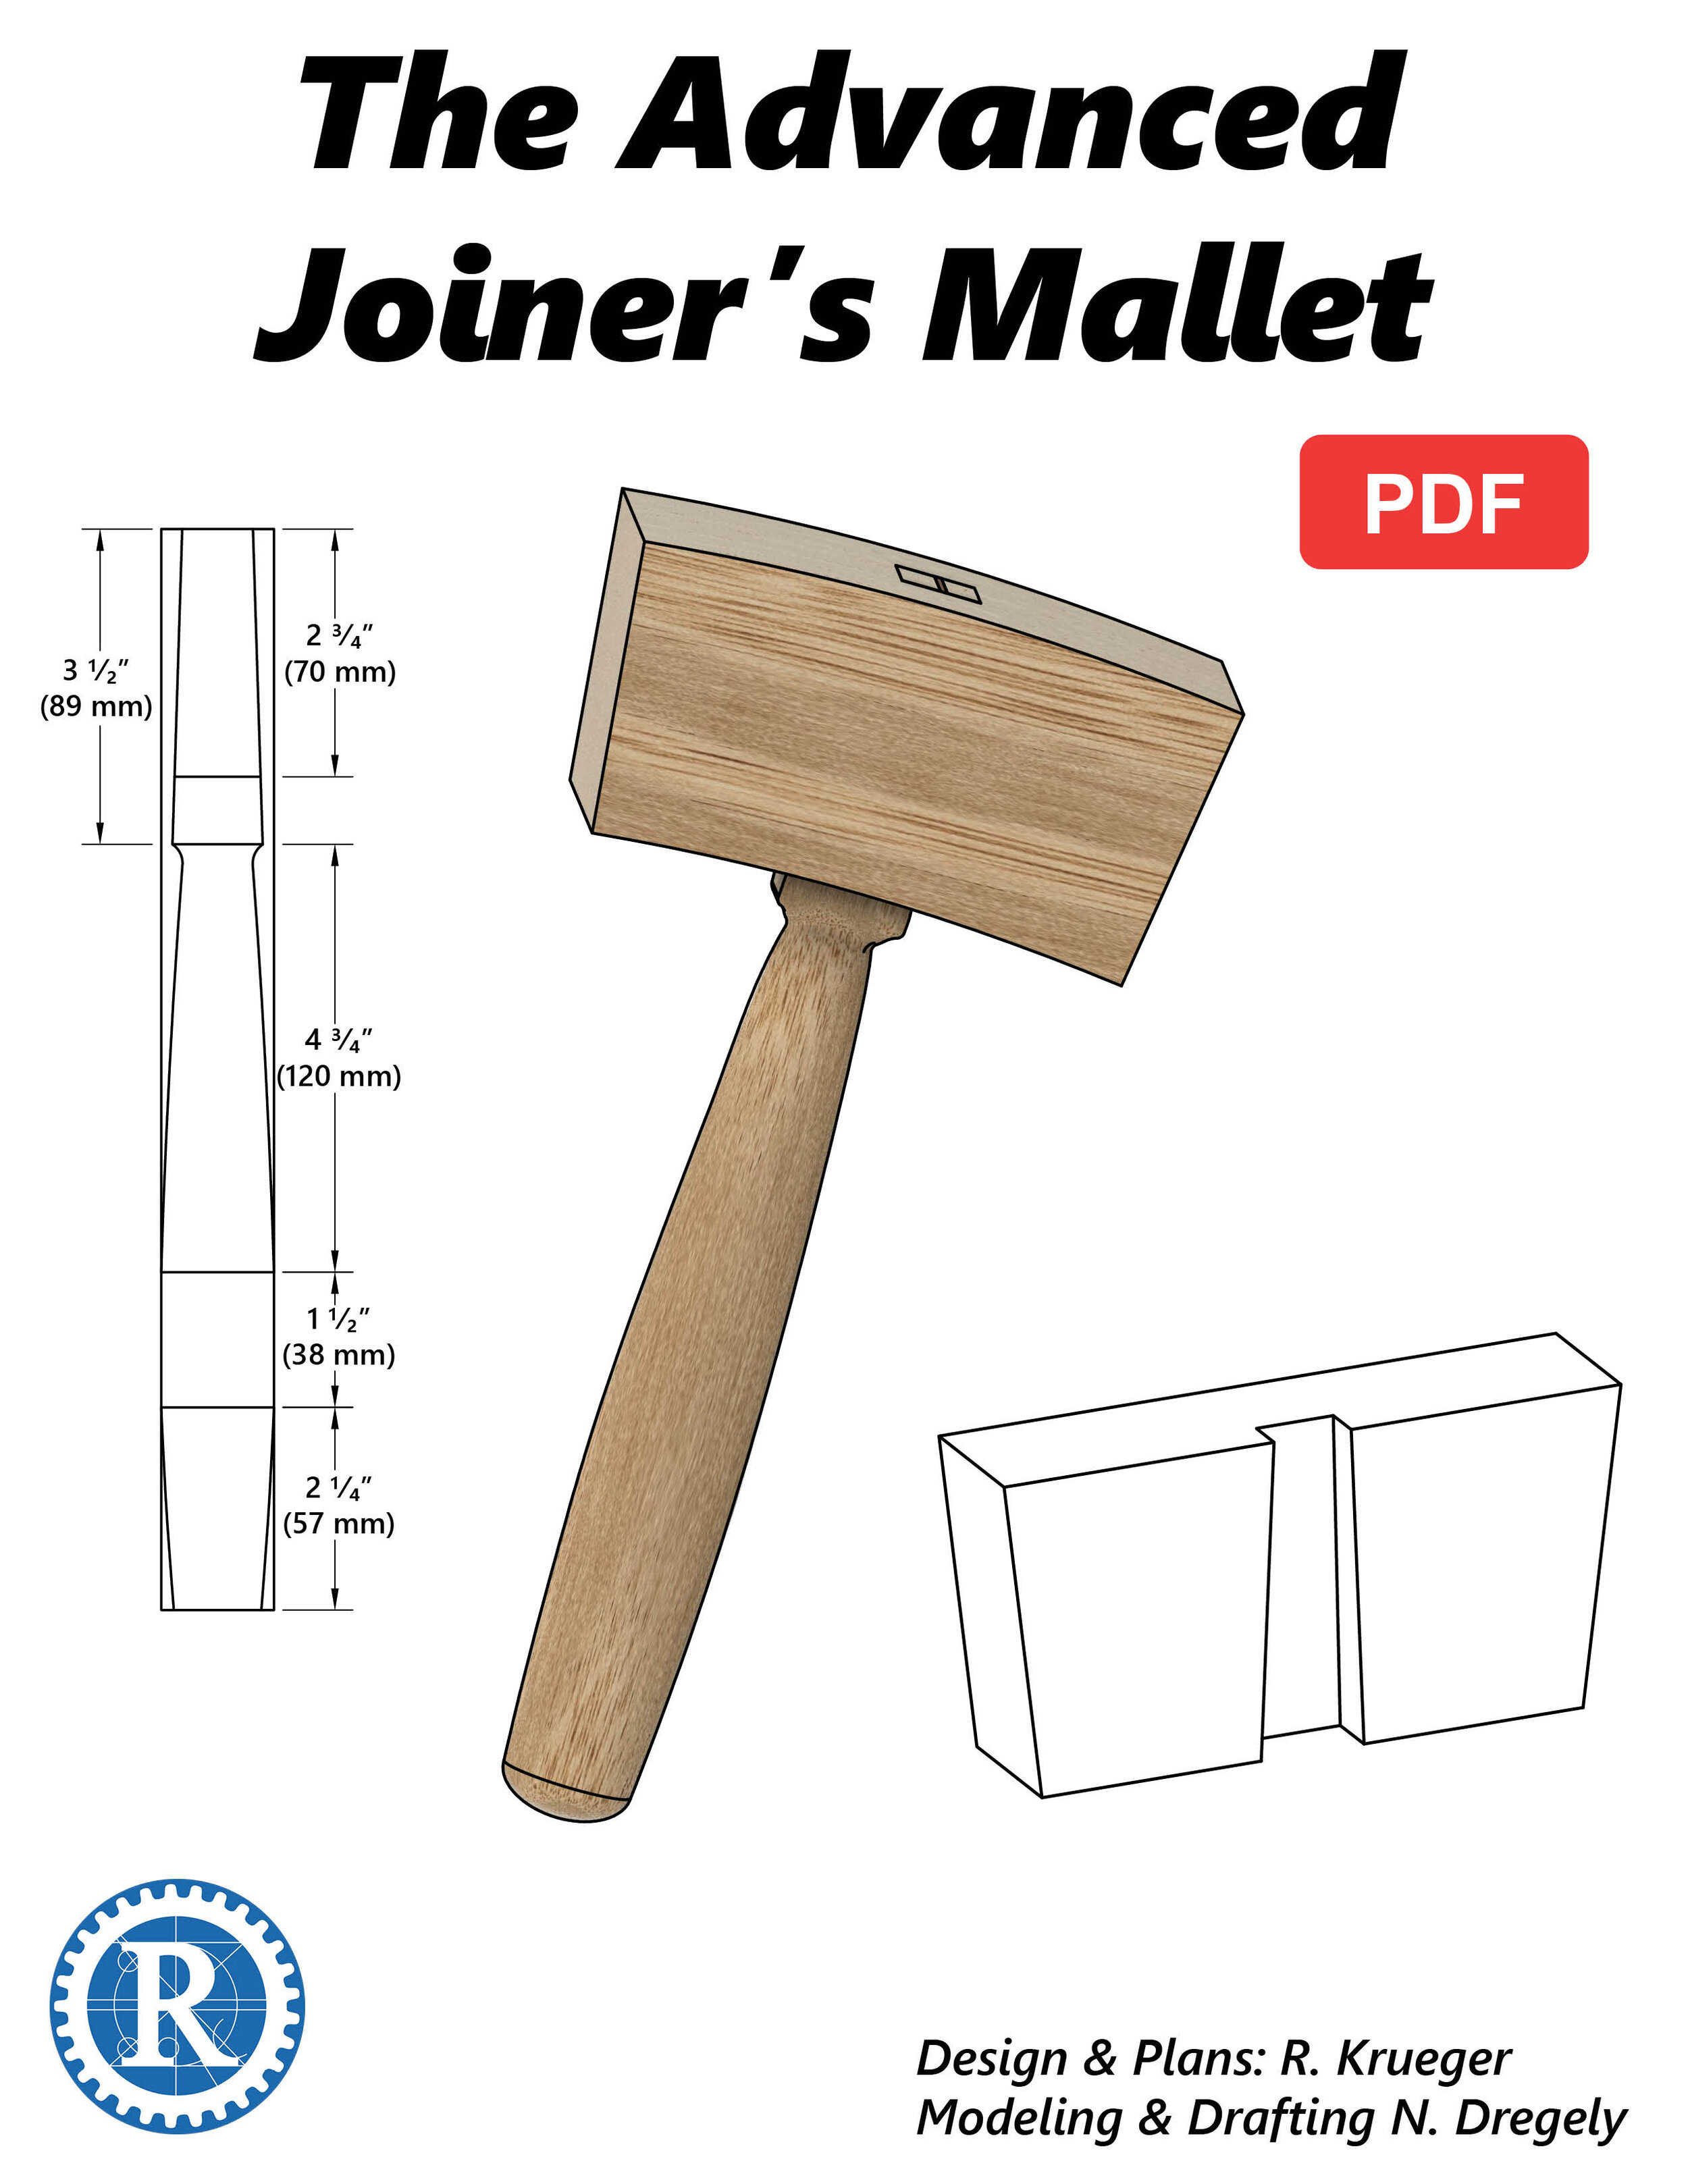 How to Build a Better Joiner's Mallet